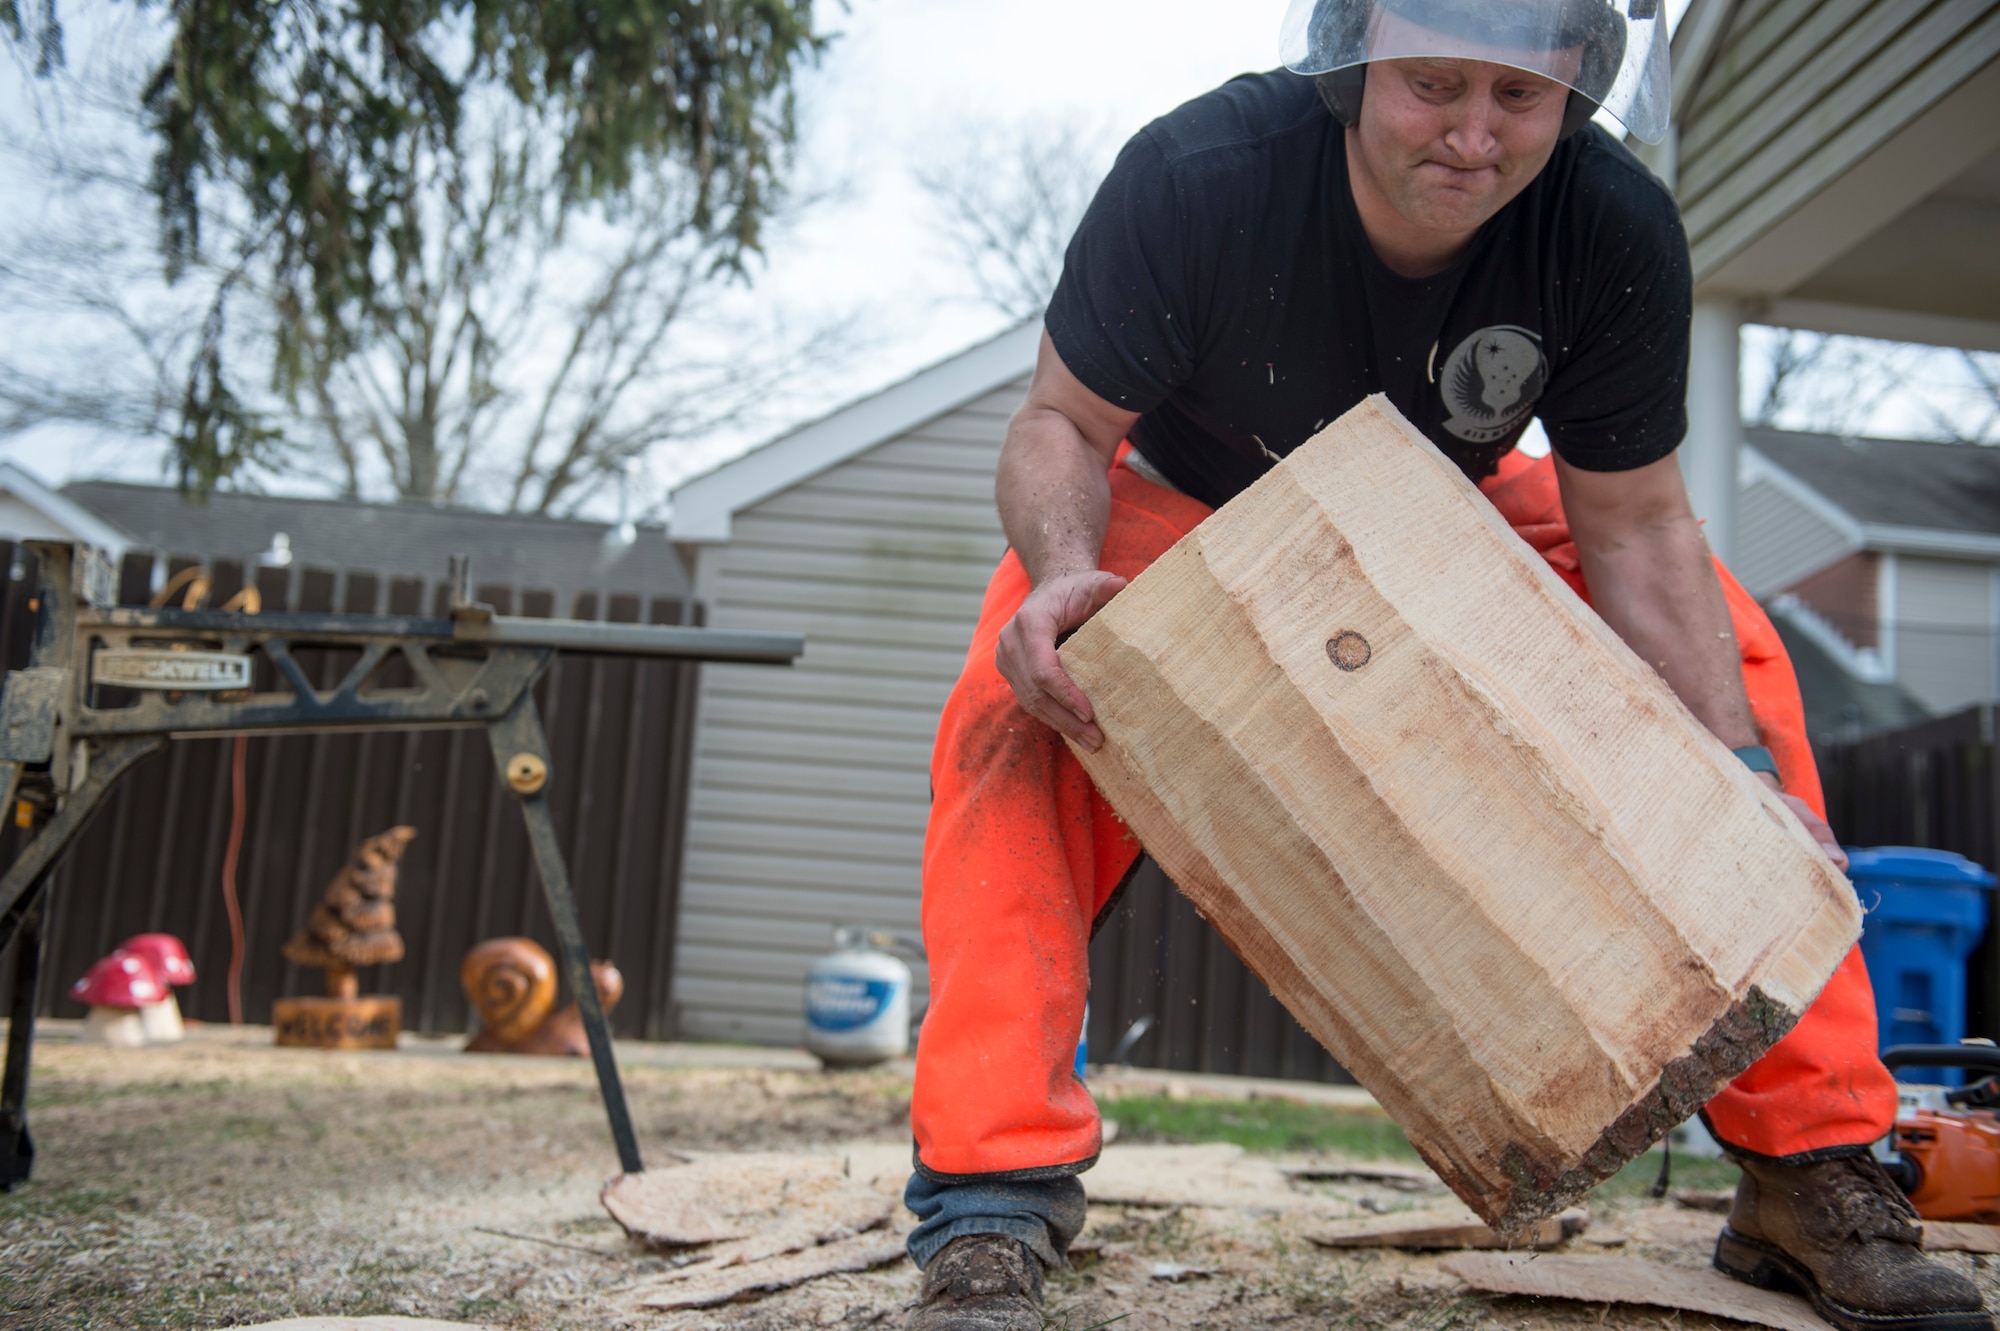 U.S. Air Force Tech. Sgt. Scott Herbert, 818th Mobility Support Advisory Squadron air advisor, moves a log to his work station to start carving an art piece March 12, 2020, at his house on Joint Base McGuire-Dix-Lakehurst, New Jersey. Herbert has been practicing chainsaw art for two years and has carved owls, eagles, rams, snails, trees, pumpkins, fish and bears. (U.S. Air Force photo by Staff Sgt. Sarah Brice)